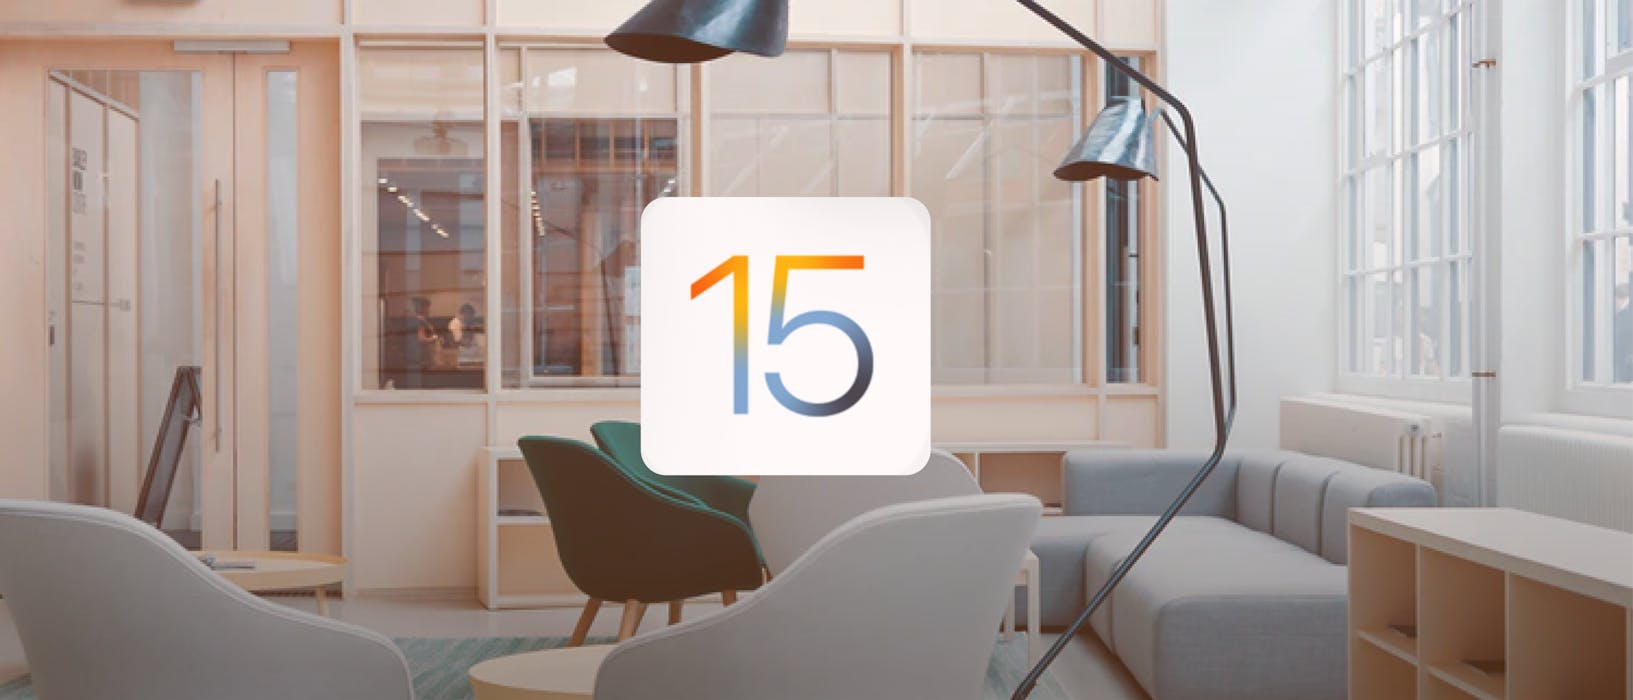 What's new in iOS 15? Let's find out!